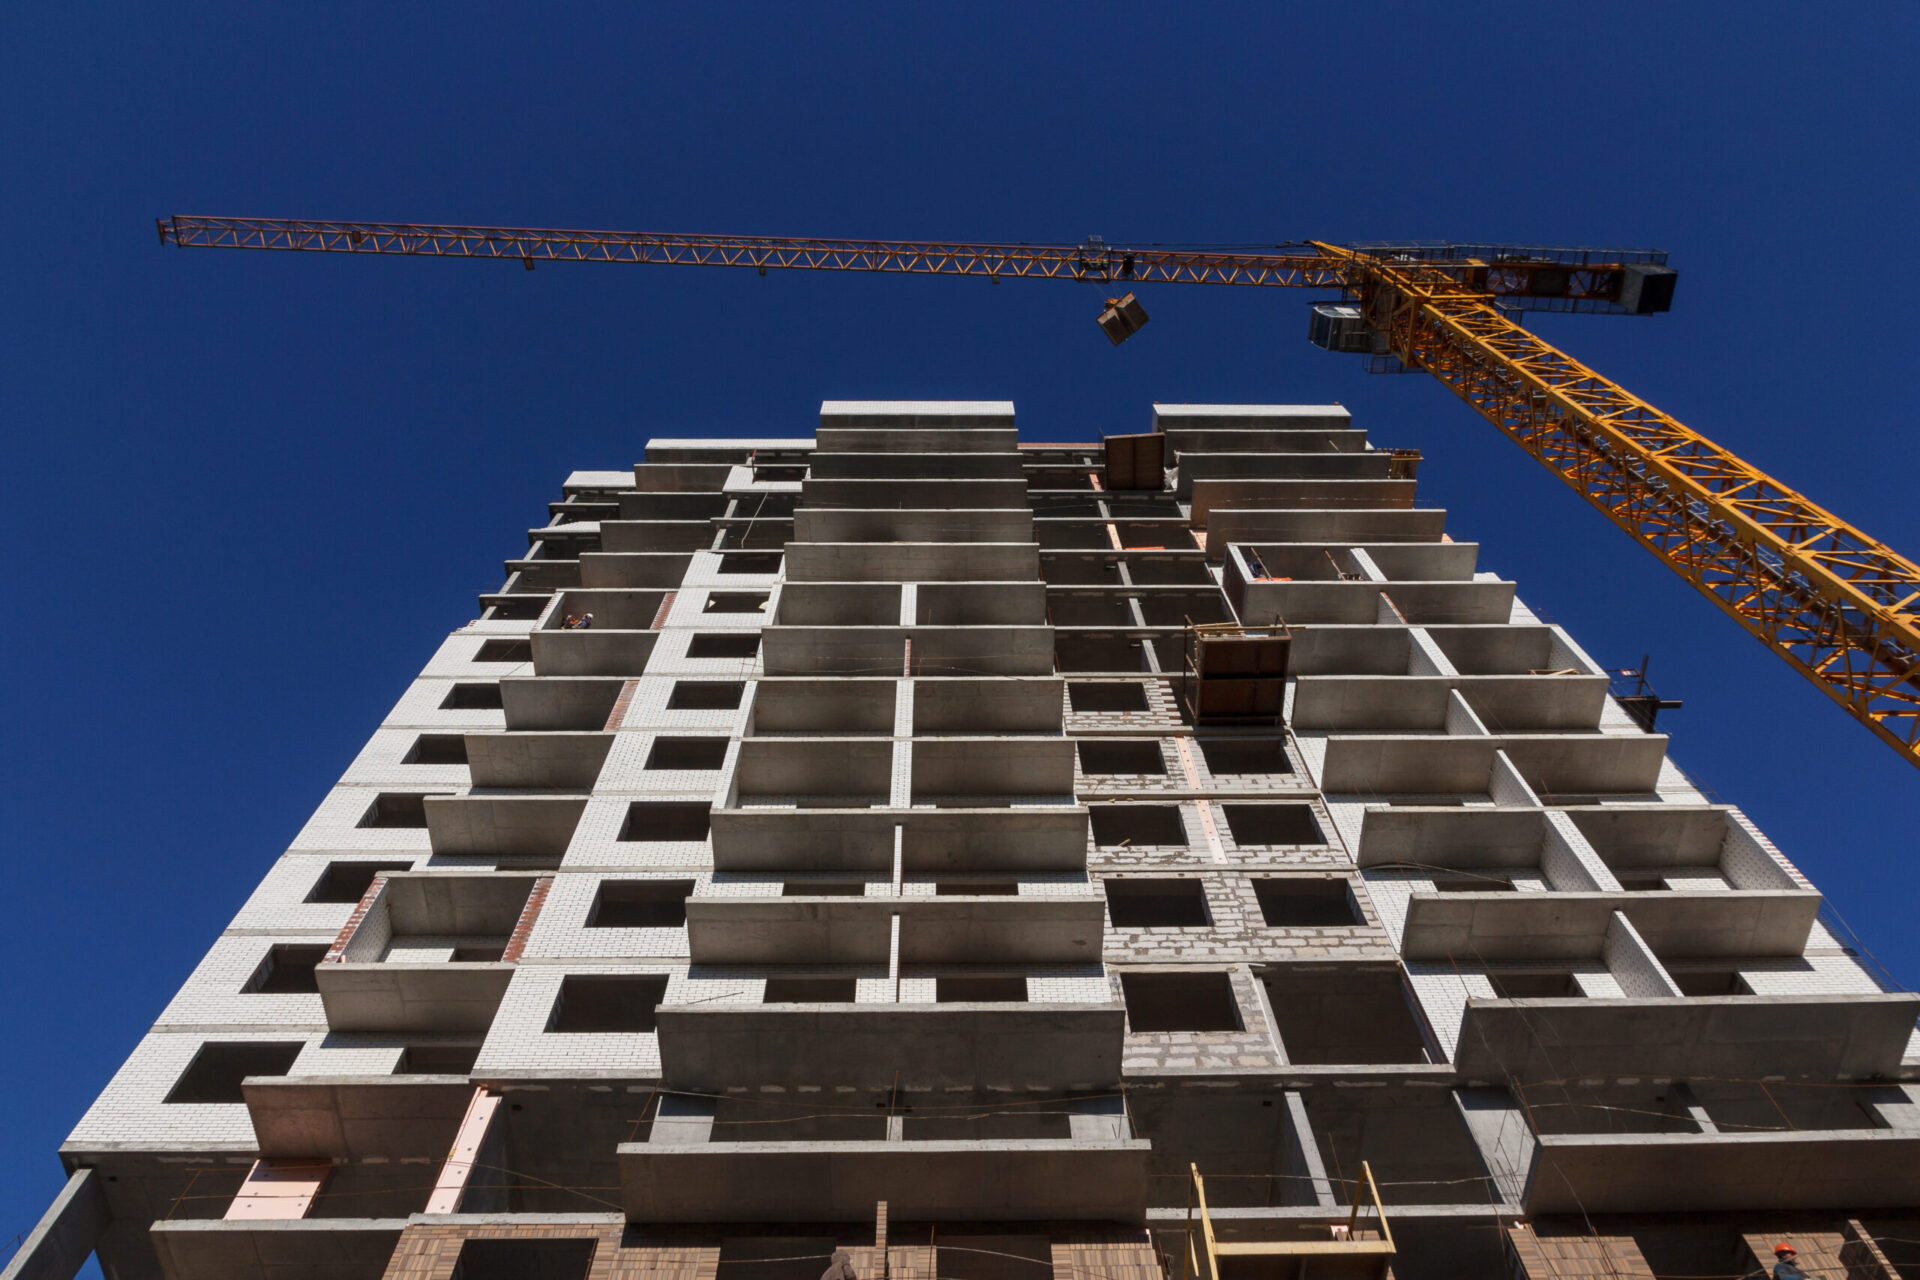 Rent Prices Are Easing In Most U.S. Metros As Multifamily Construction Stays Strong